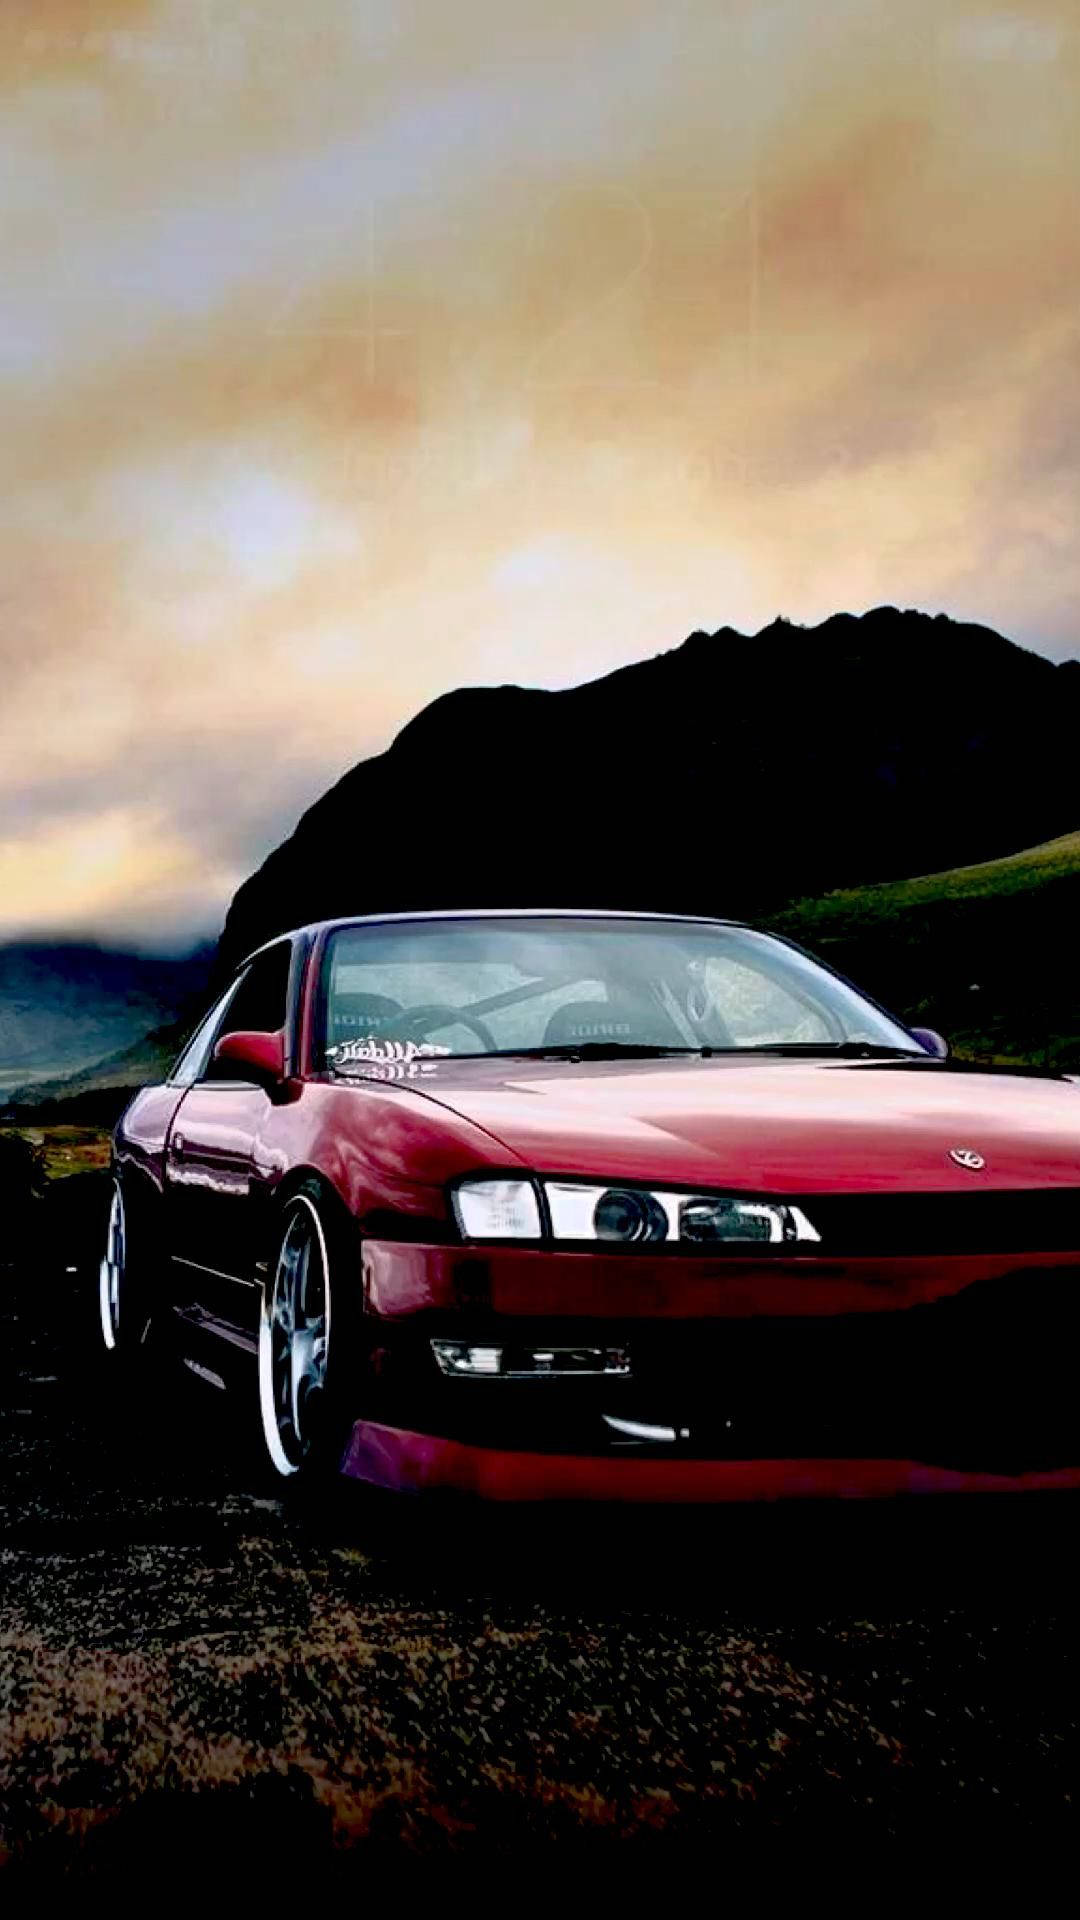 A Iconic Nissan Silvia S14 Wallpaper